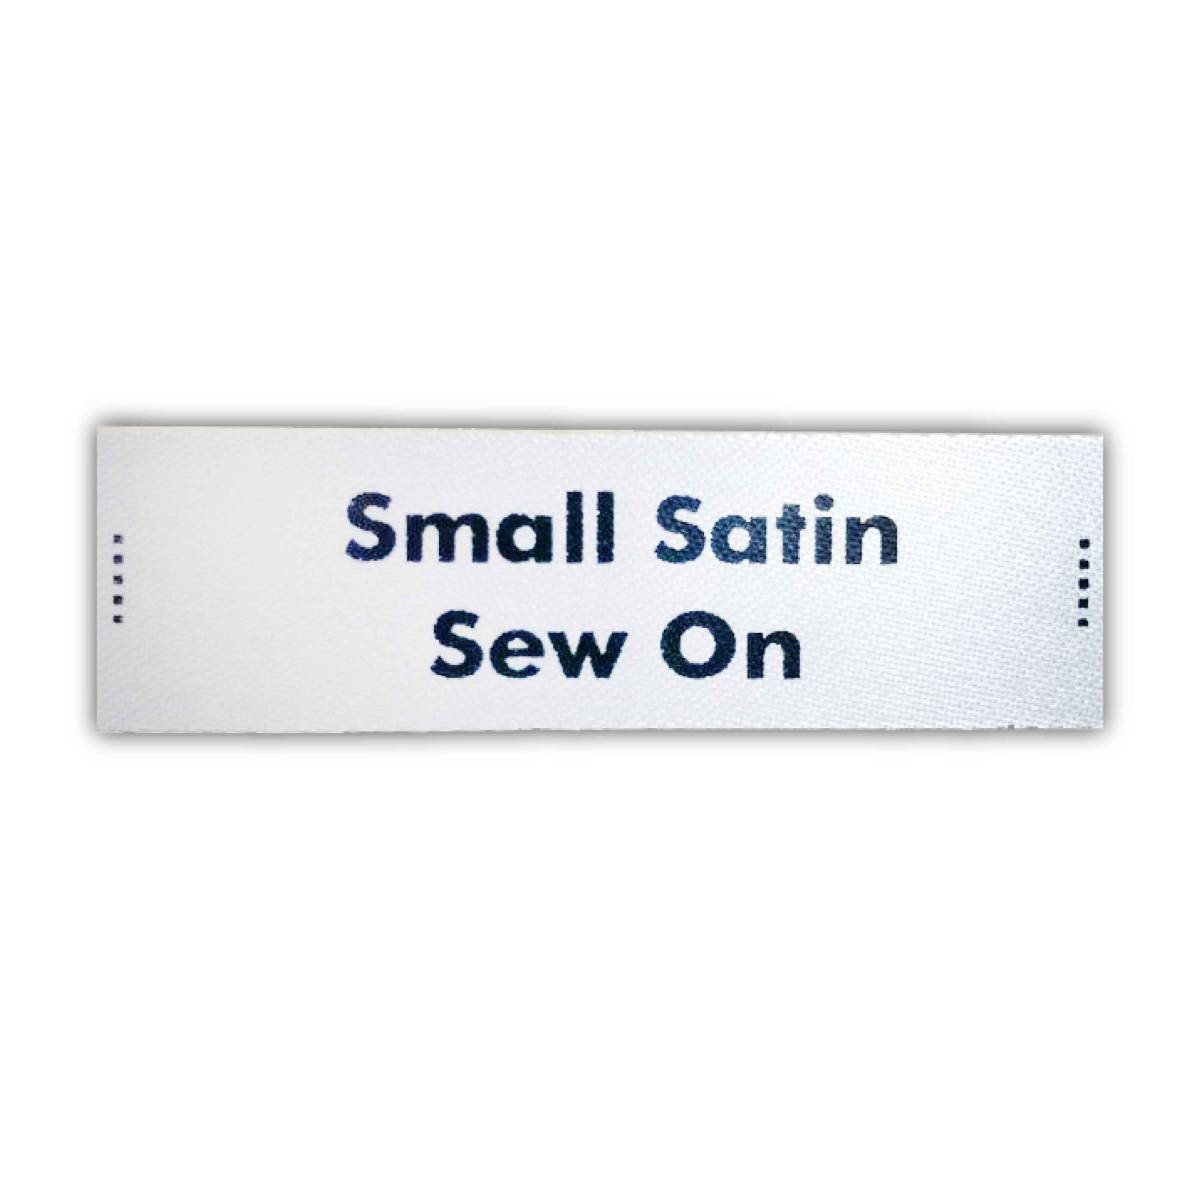 Small Satin Sew On Labels